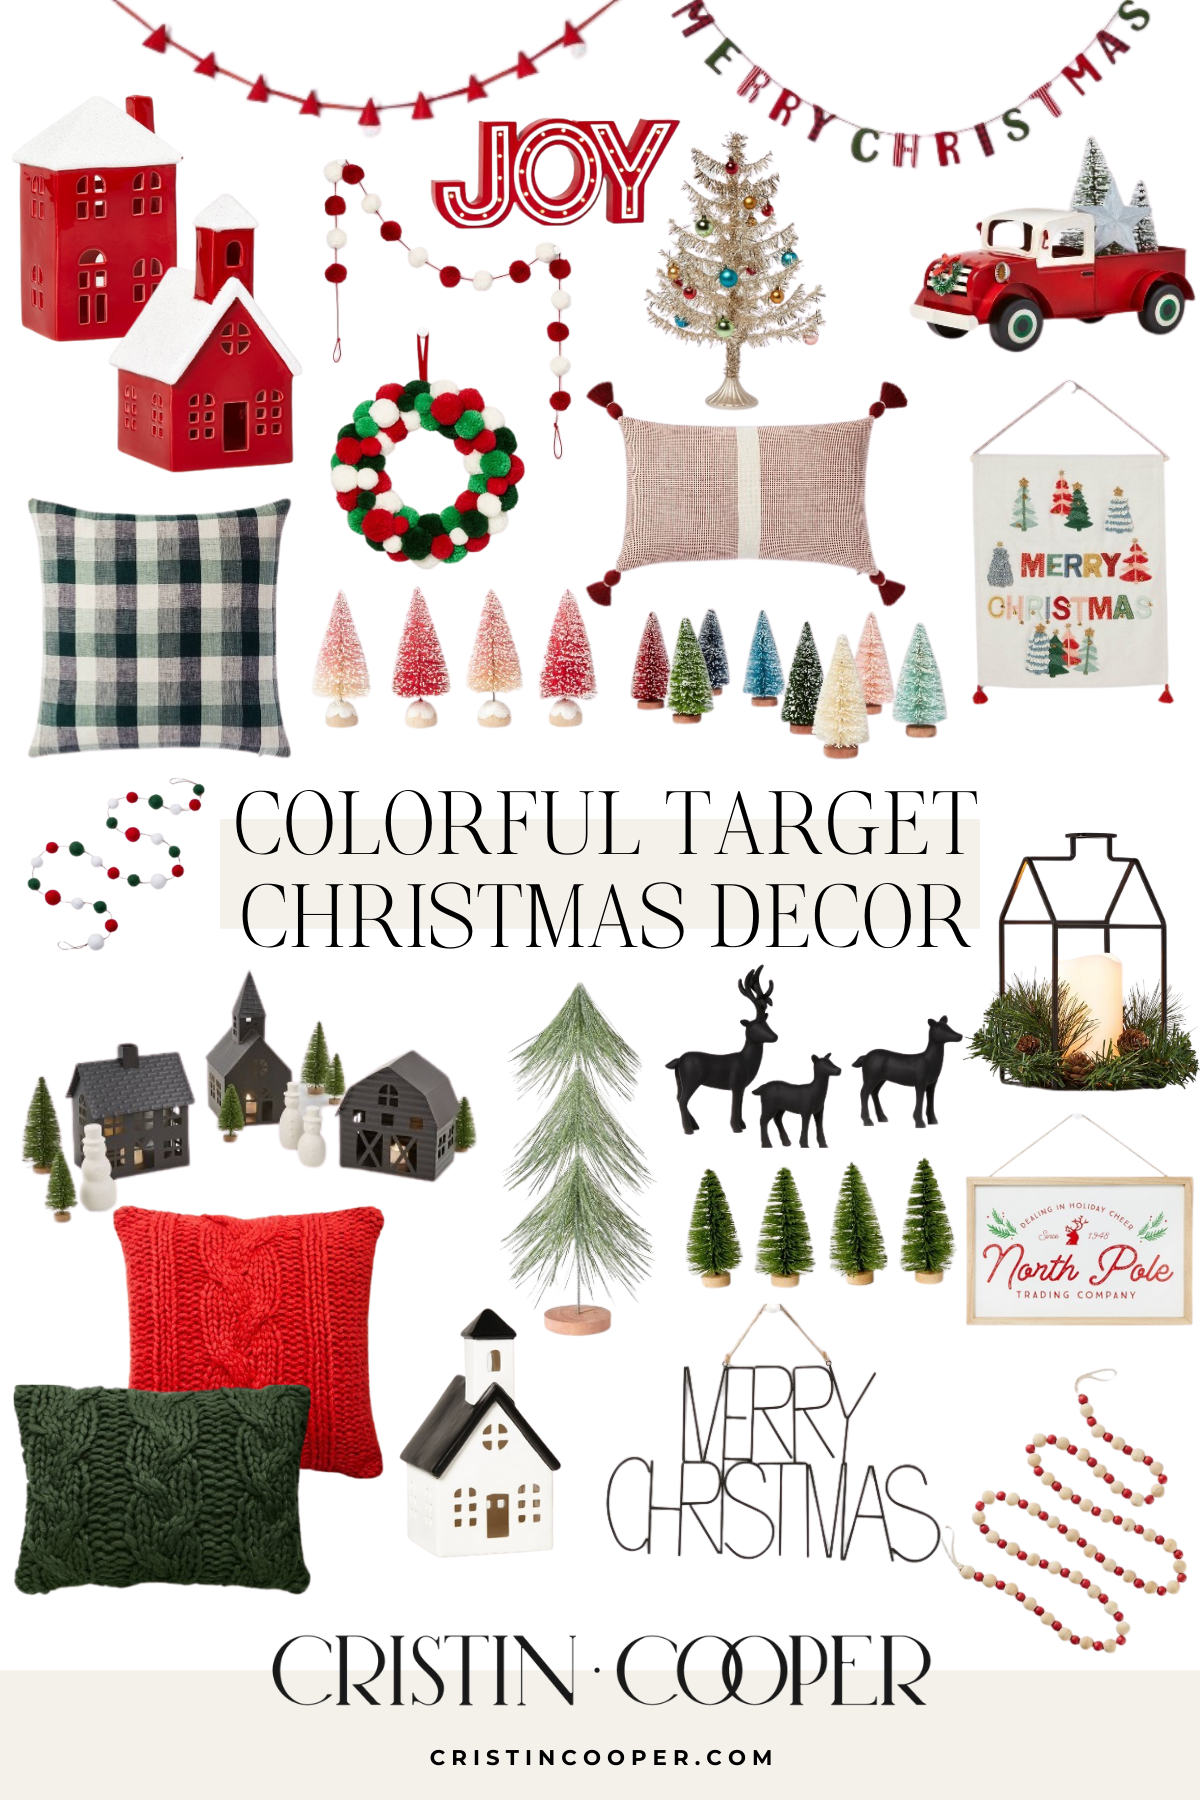 Colorful Christmas Decor from Target